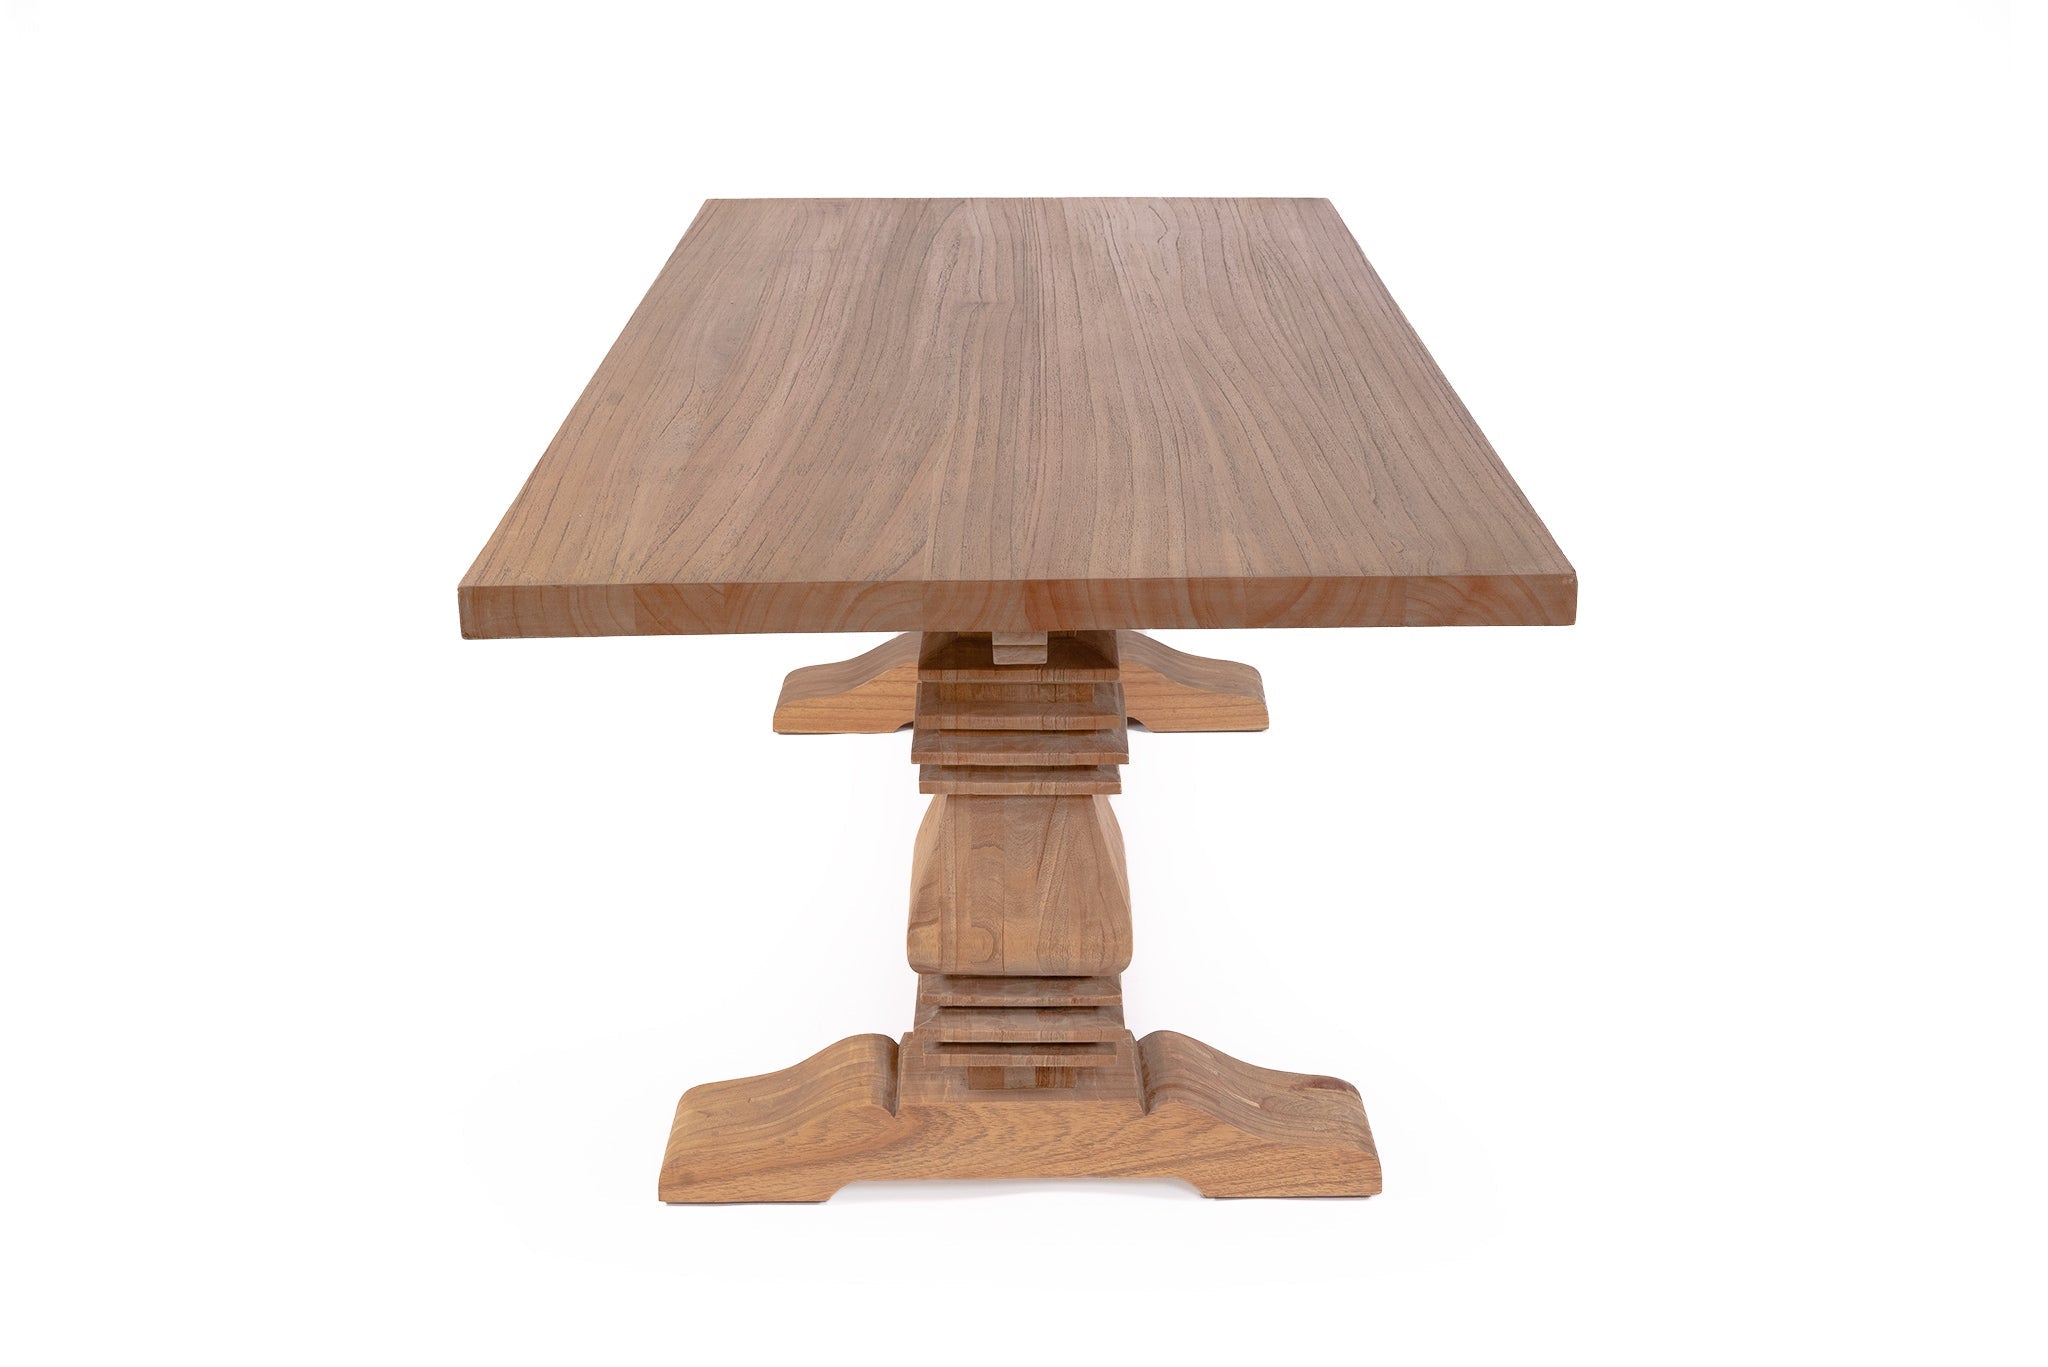 Pedestal Dining Table - 350cm | Creeping Fig